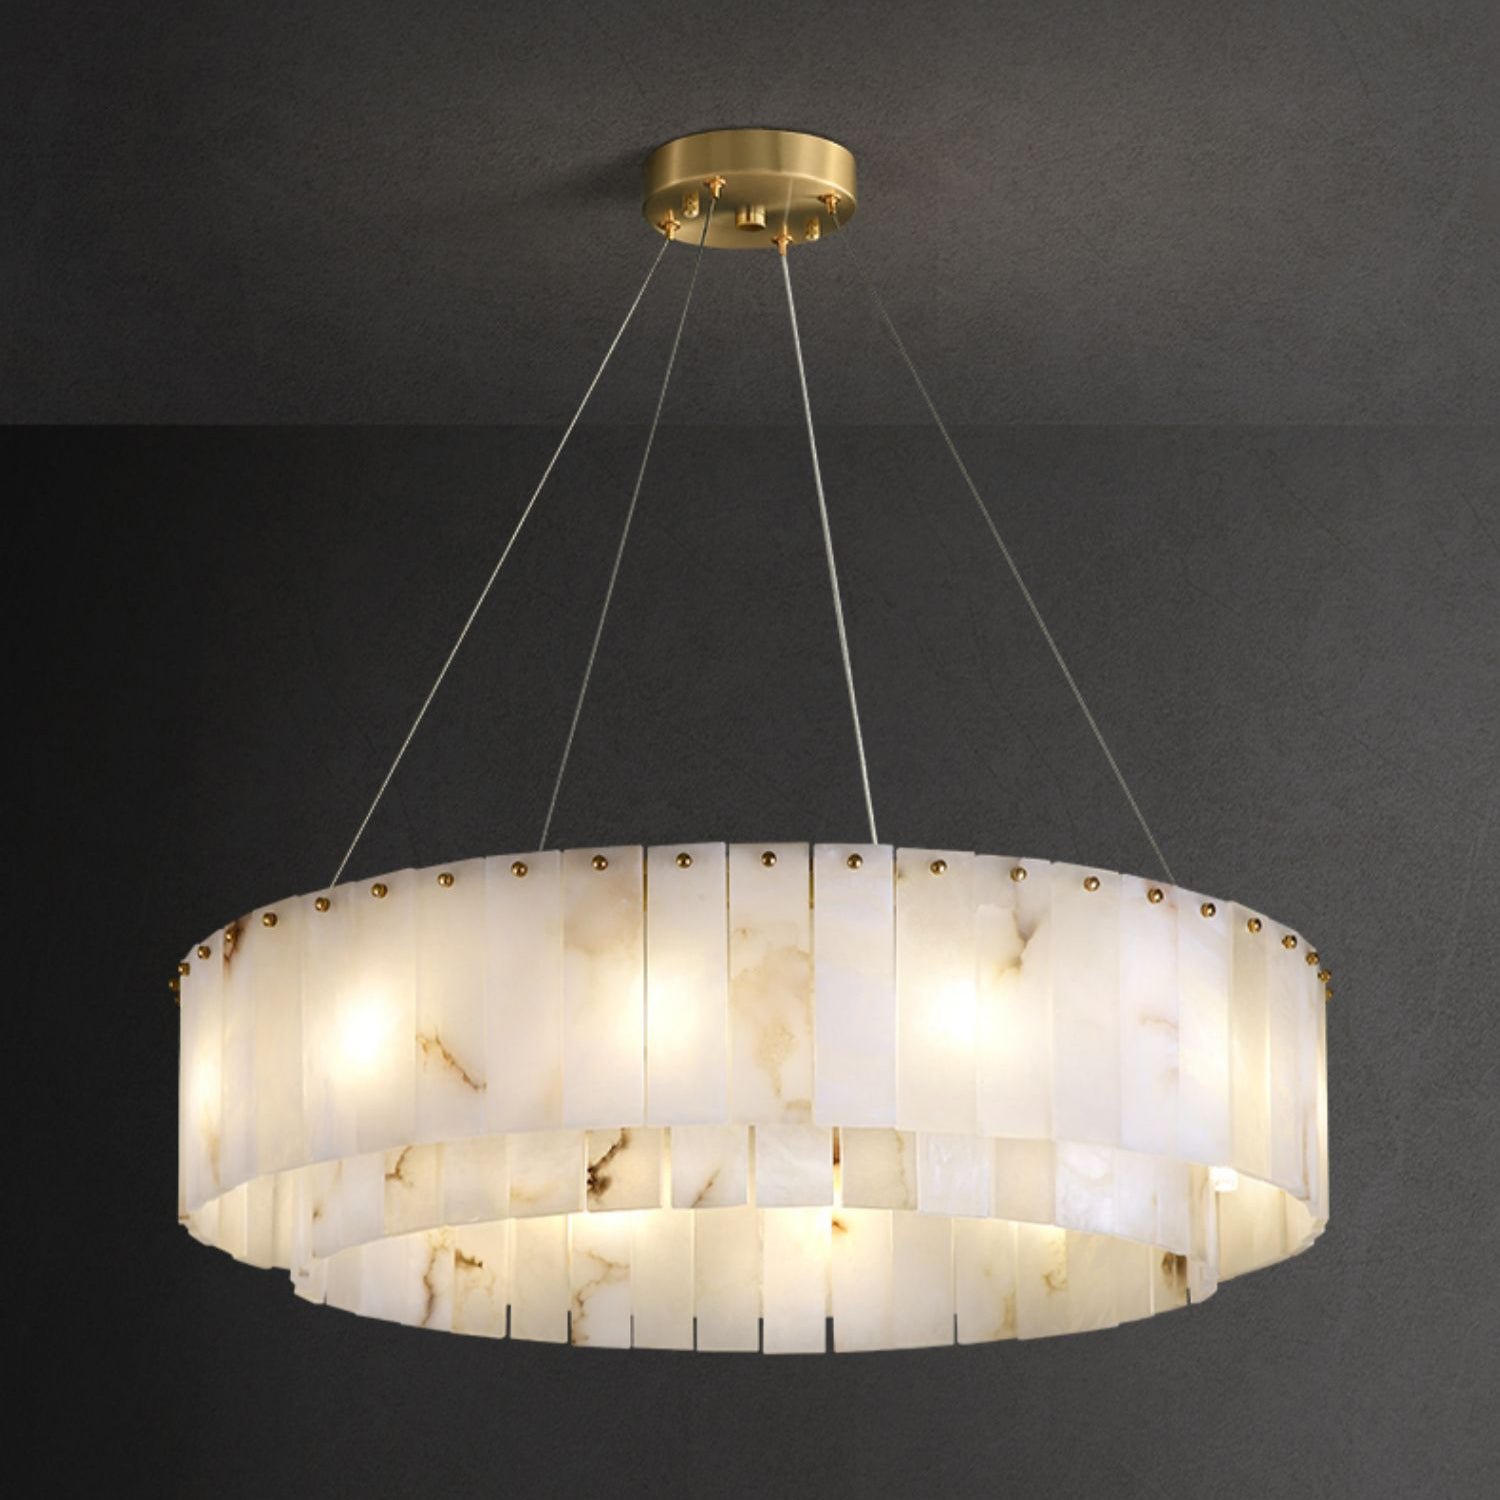 Alabaster Rock Chandelier - Dimensions: Diameter 31.4 inches x Height 59 inches (80cm x 150cm), Material: Brass and White Alabaster.